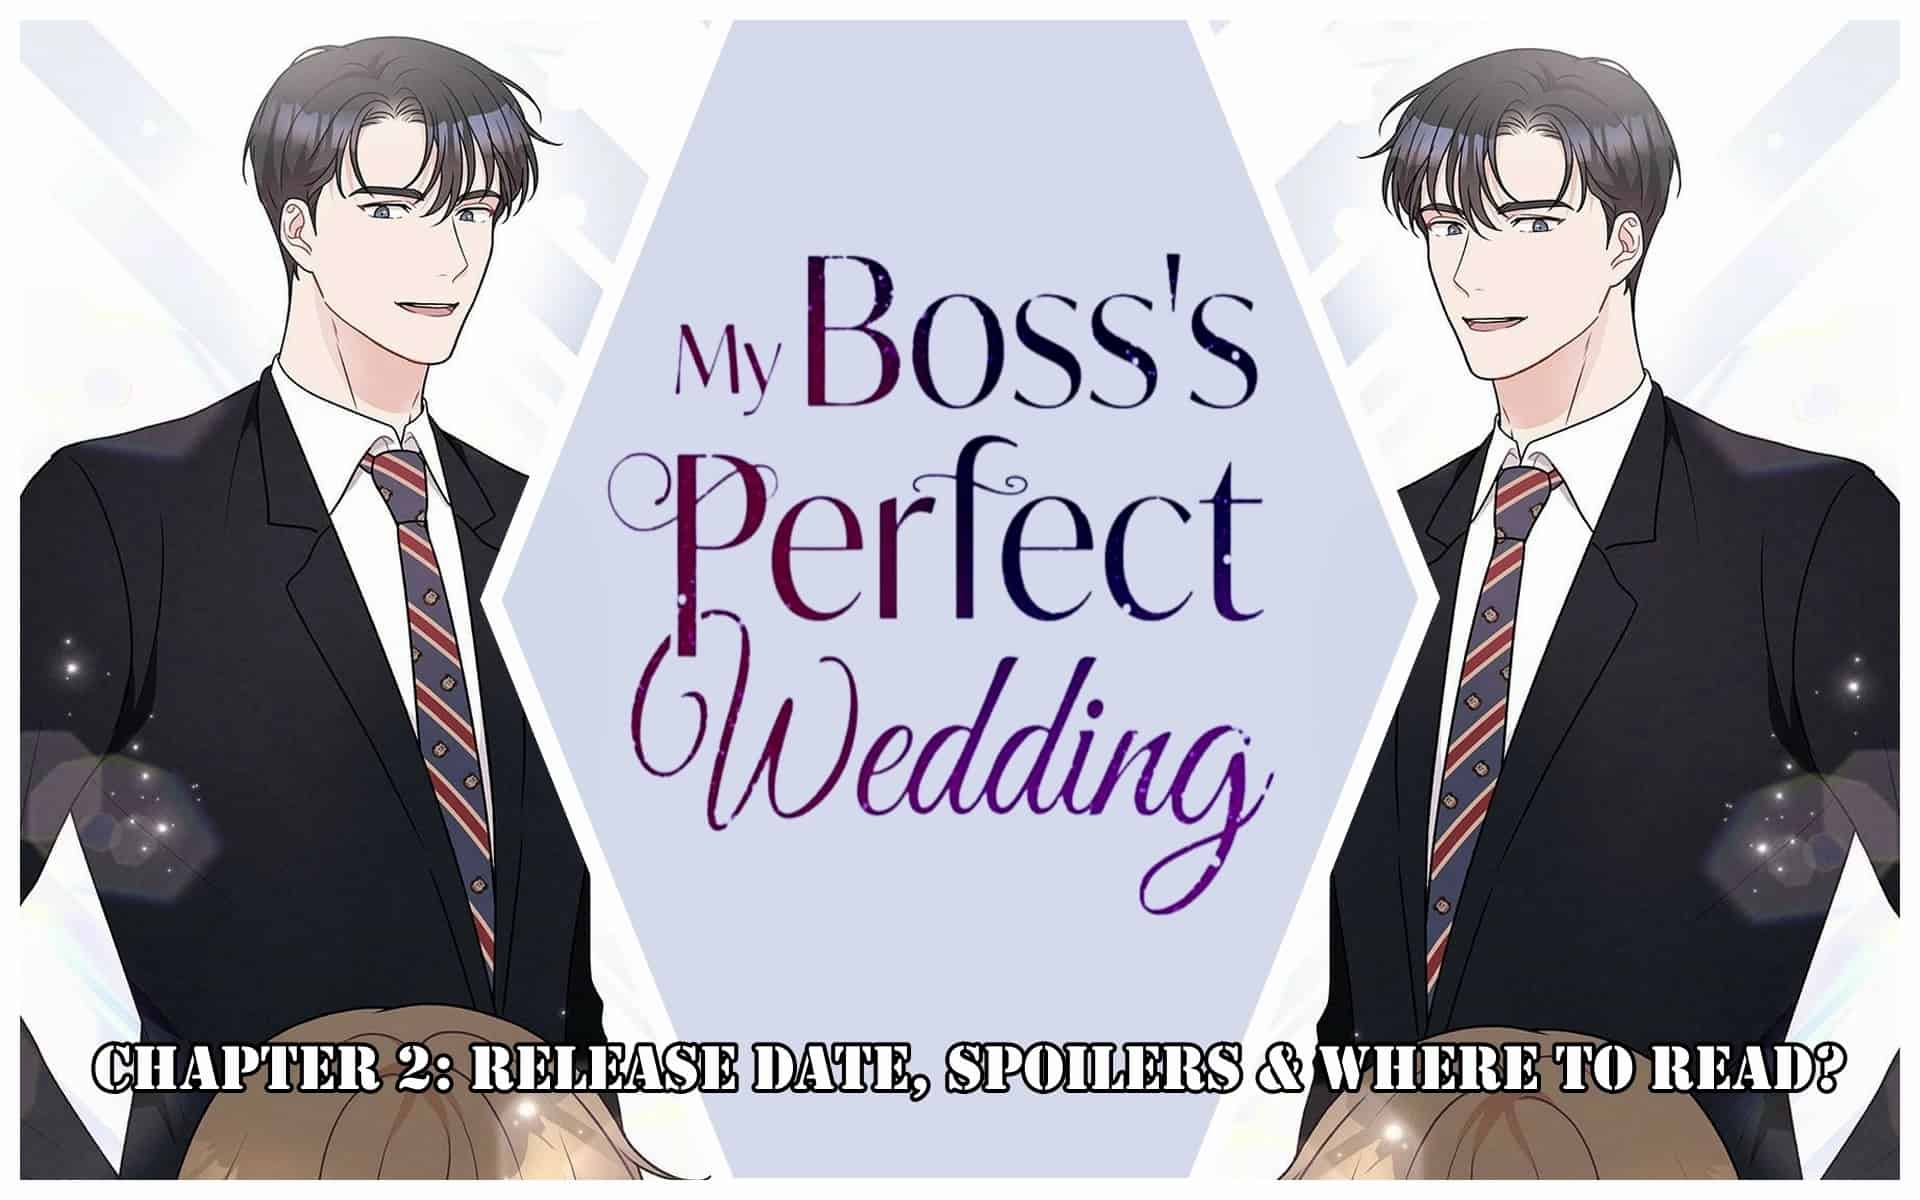 My Boss’s Perfect Wedding Chapter 2: Release Date, Spoilers & Where to Read?